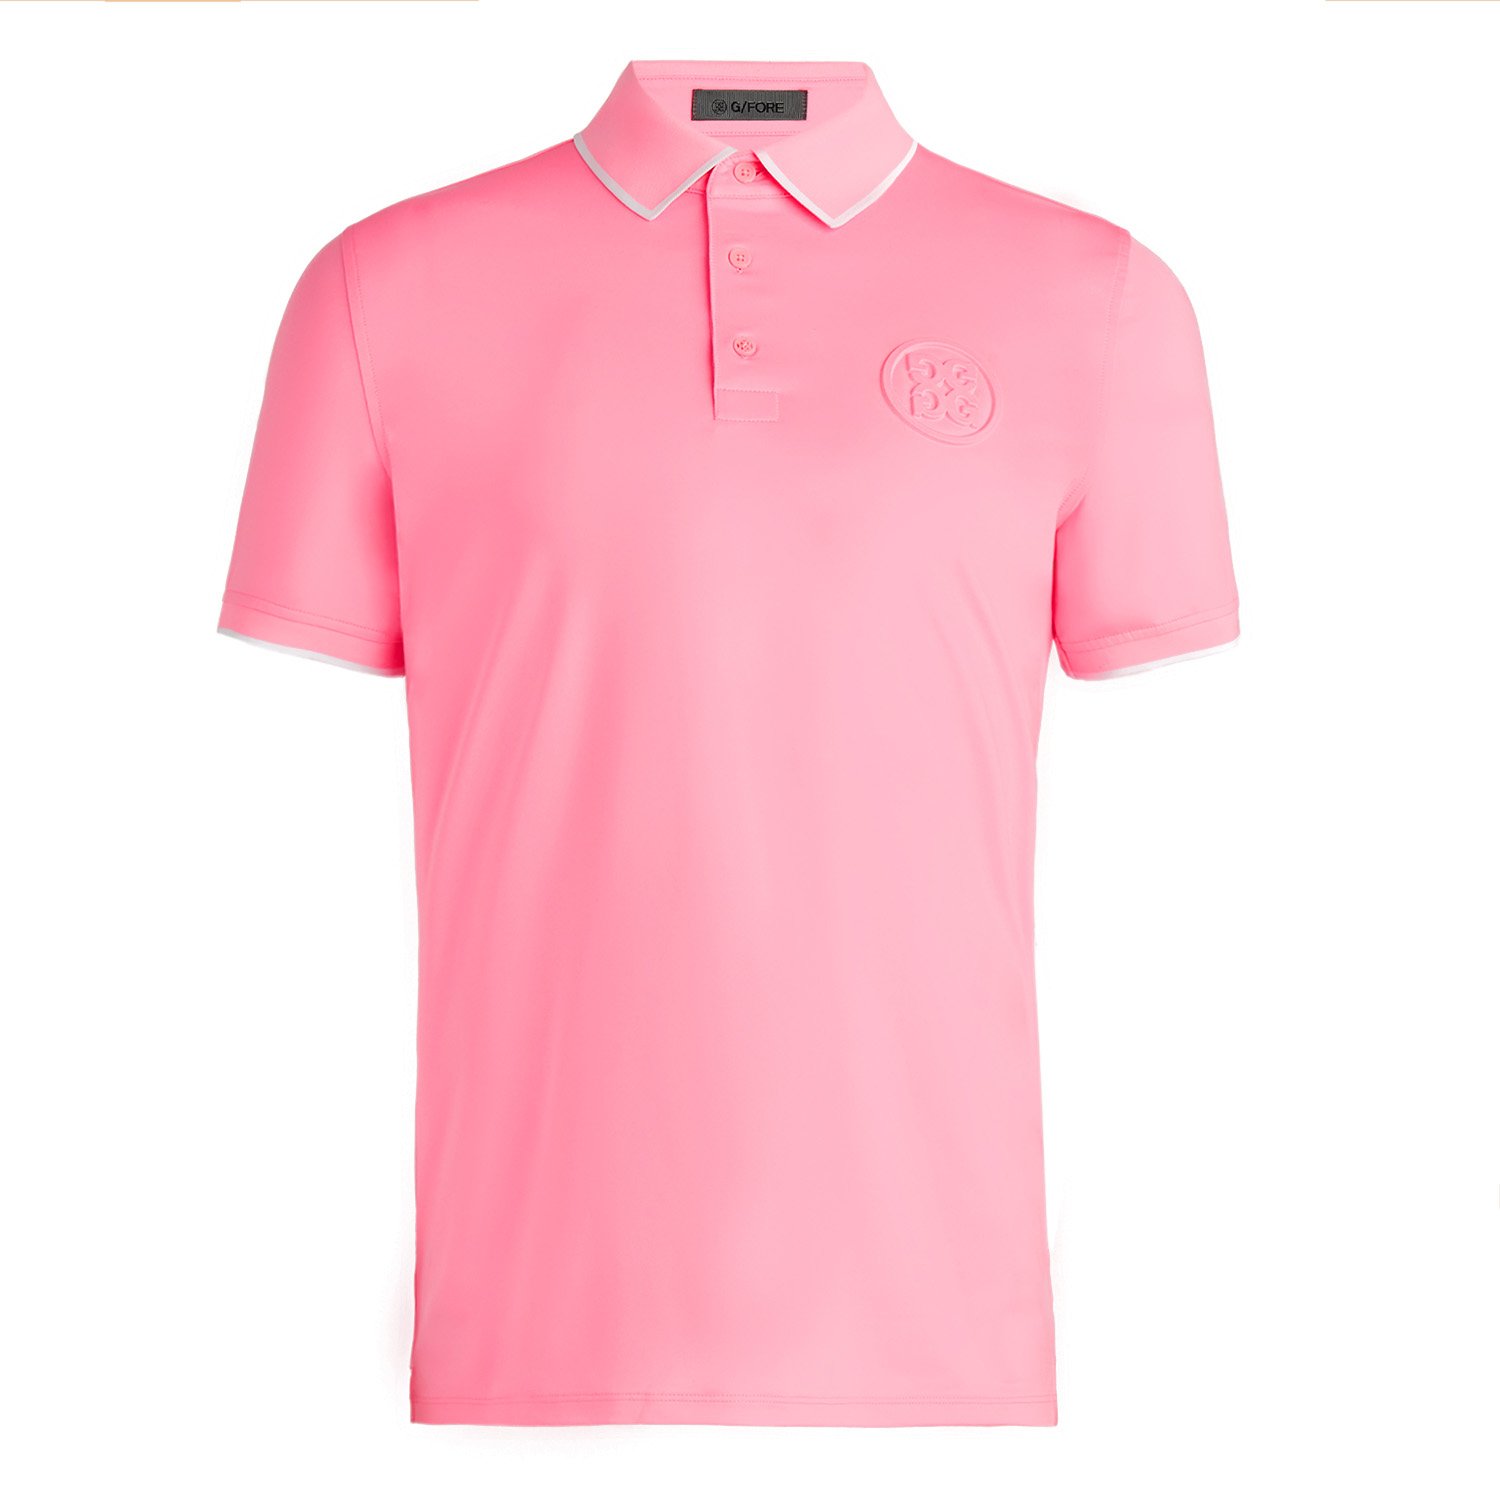 G/FORE Rib Collar Circle G’S Embossed Tech Jersey Golf Polo Shirt